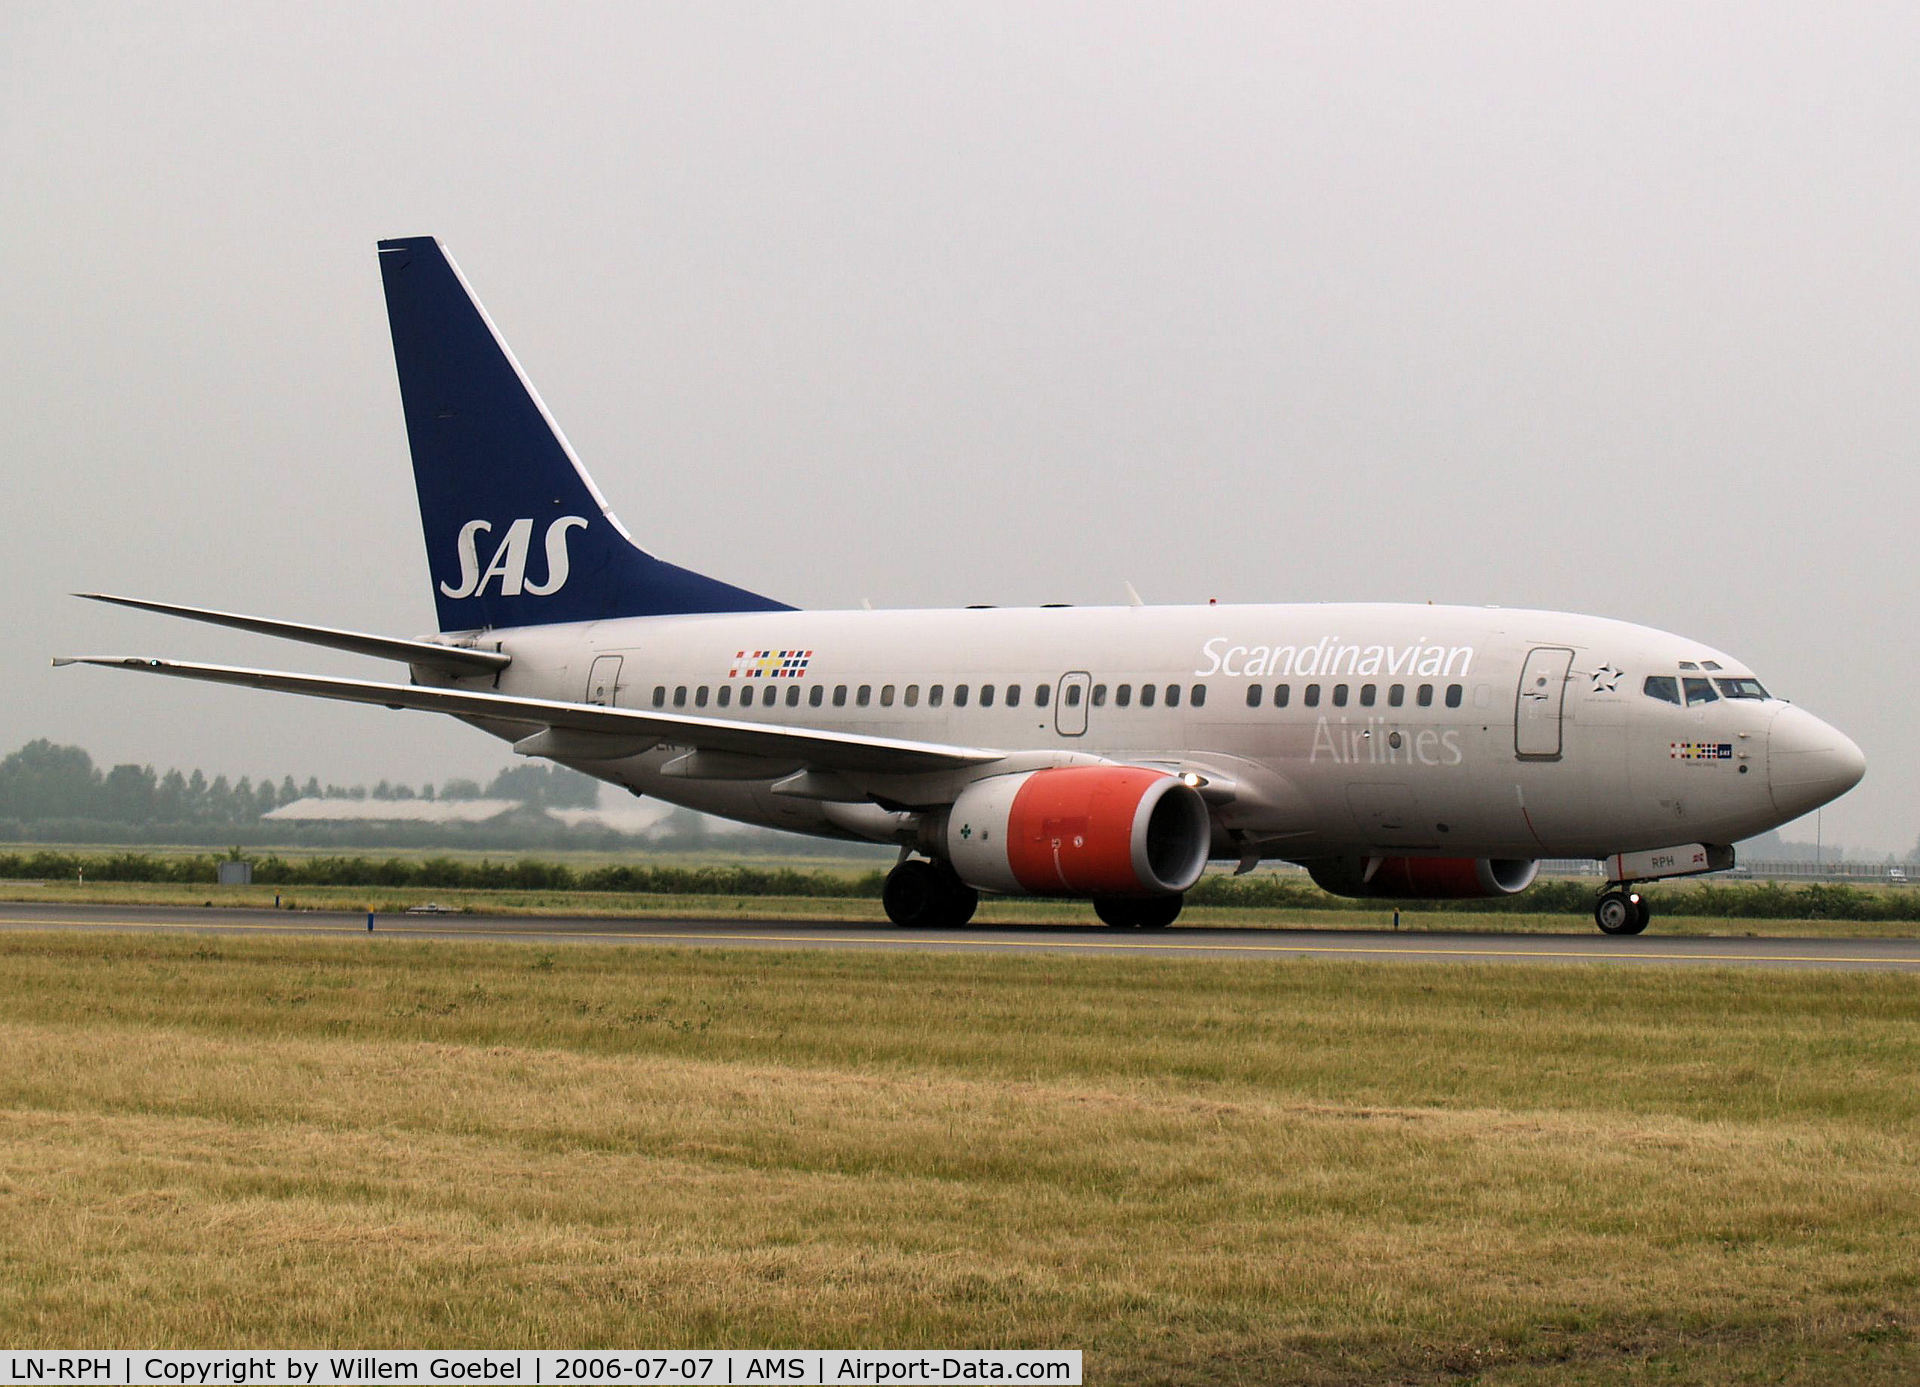 LN-RPH, 1999 Boeing 737-683 C/N 28605, Taxi to the gate of Amsterdam Airport